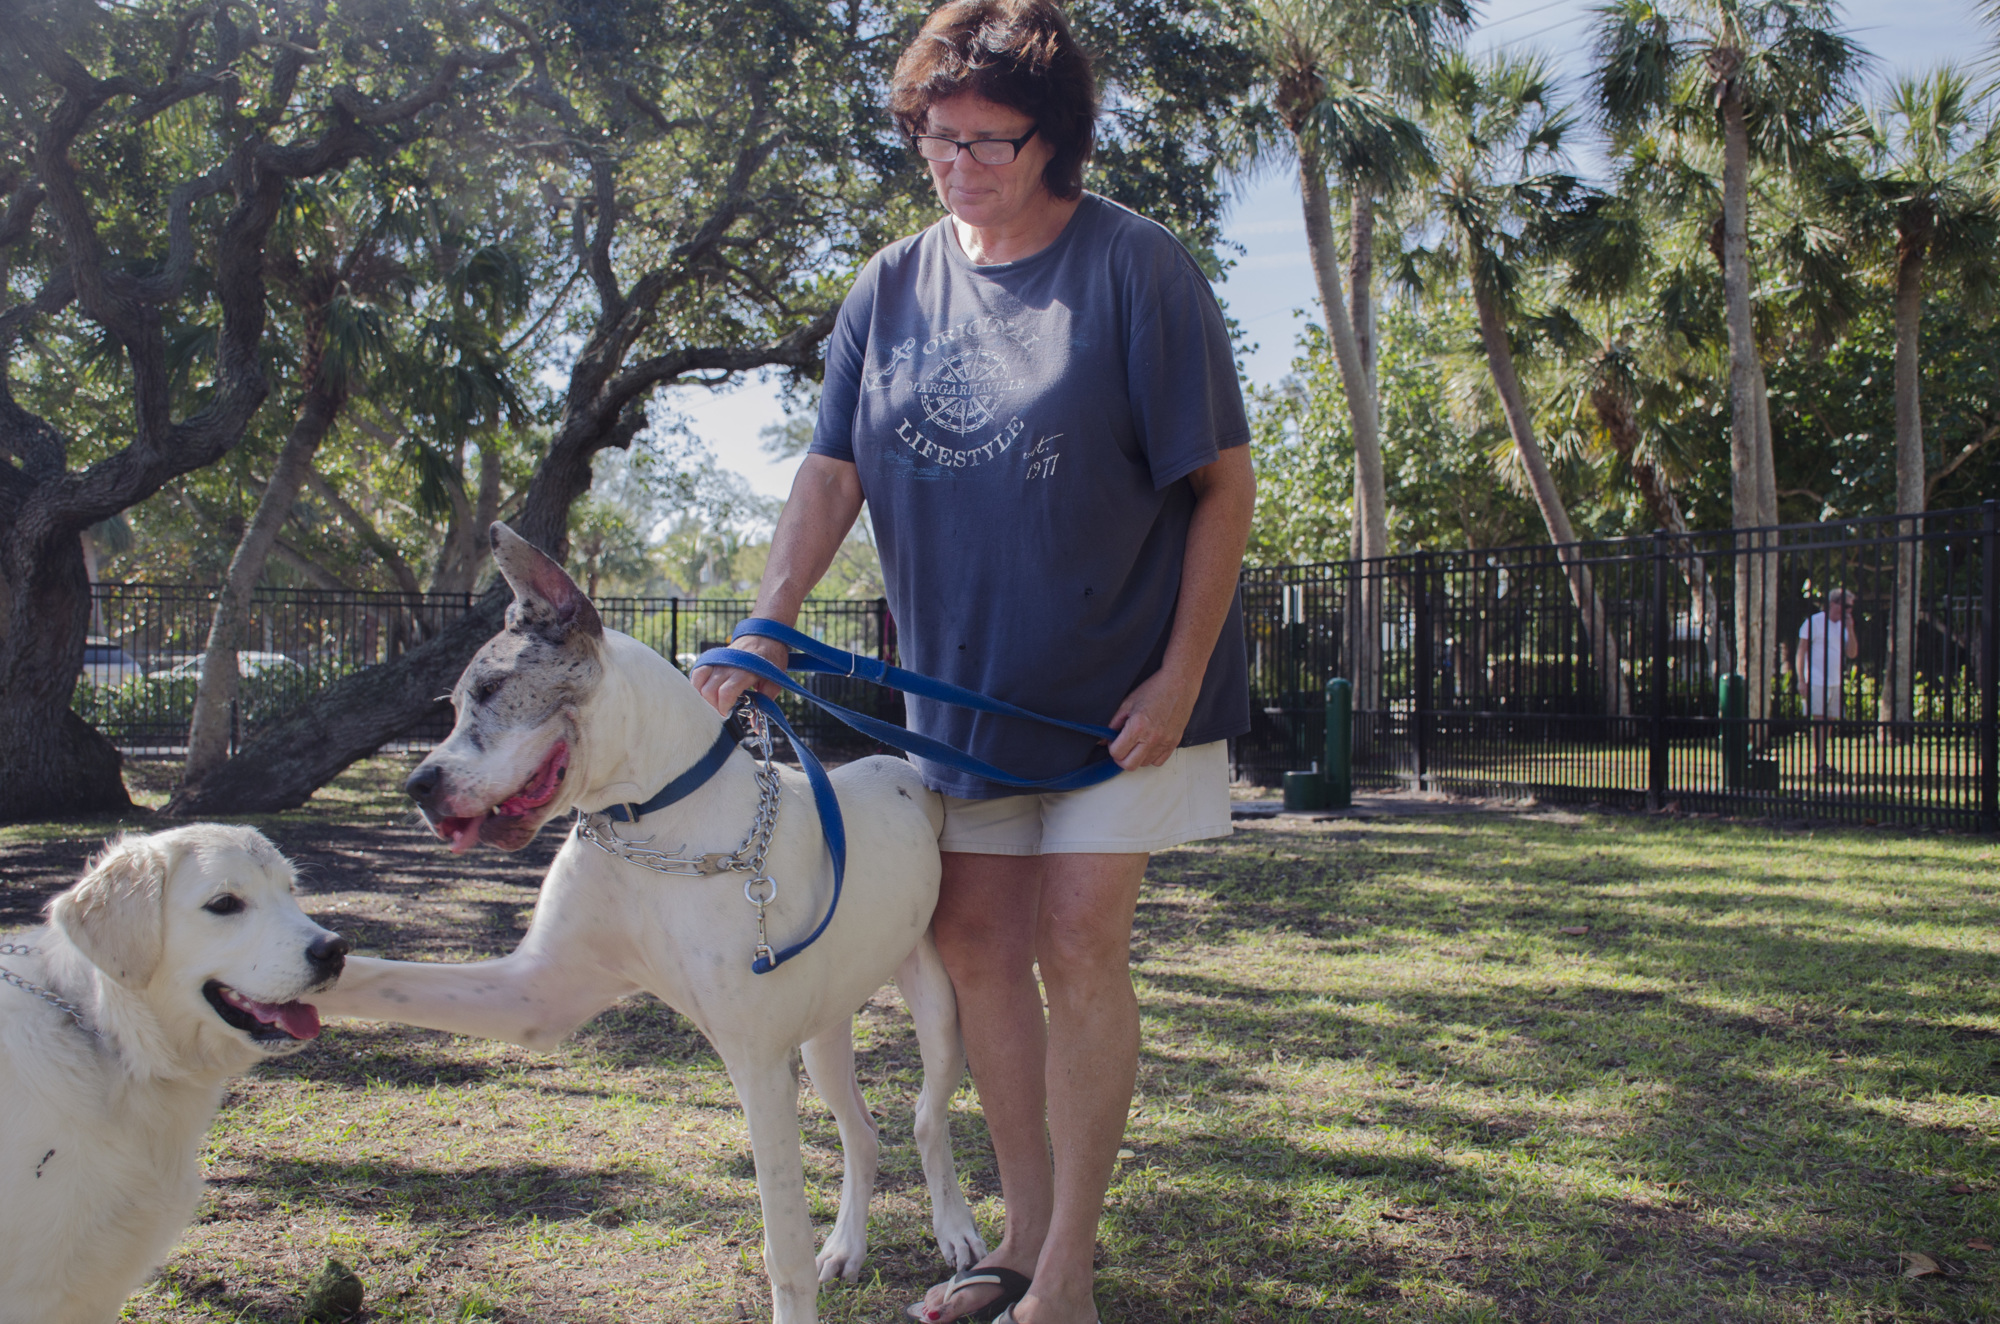 Angie Falknor and her great dane Emma come to Bayfront dog park at least once a day.